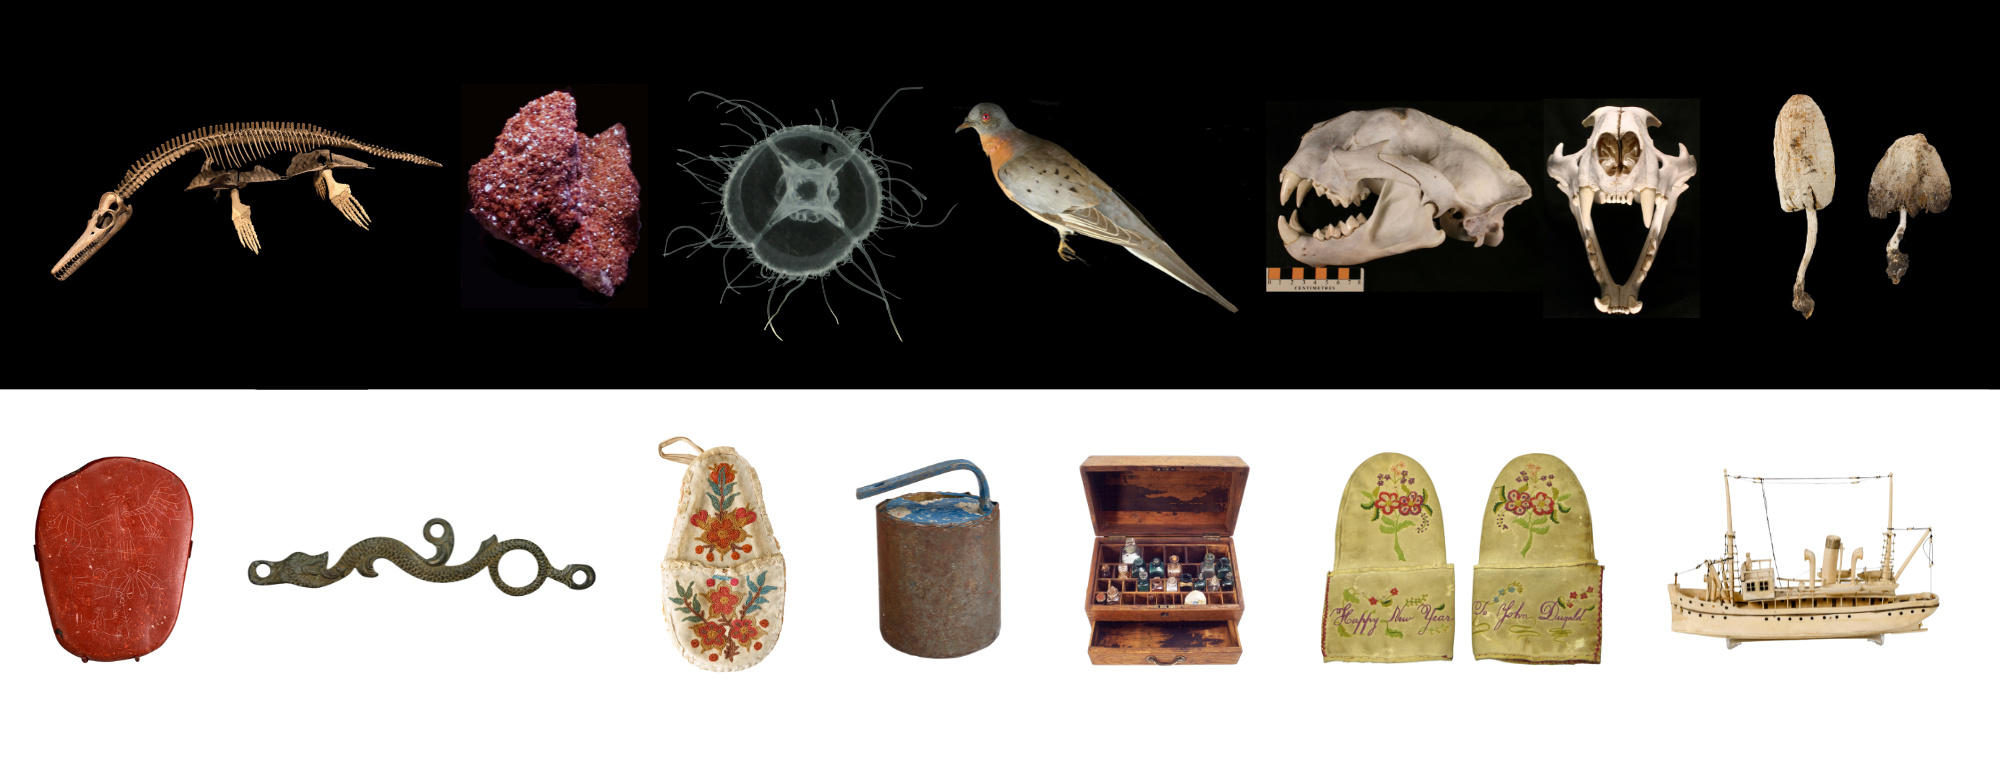 A collage featuring a range of artifacts and specimens from the Manitoba Museum Collections.